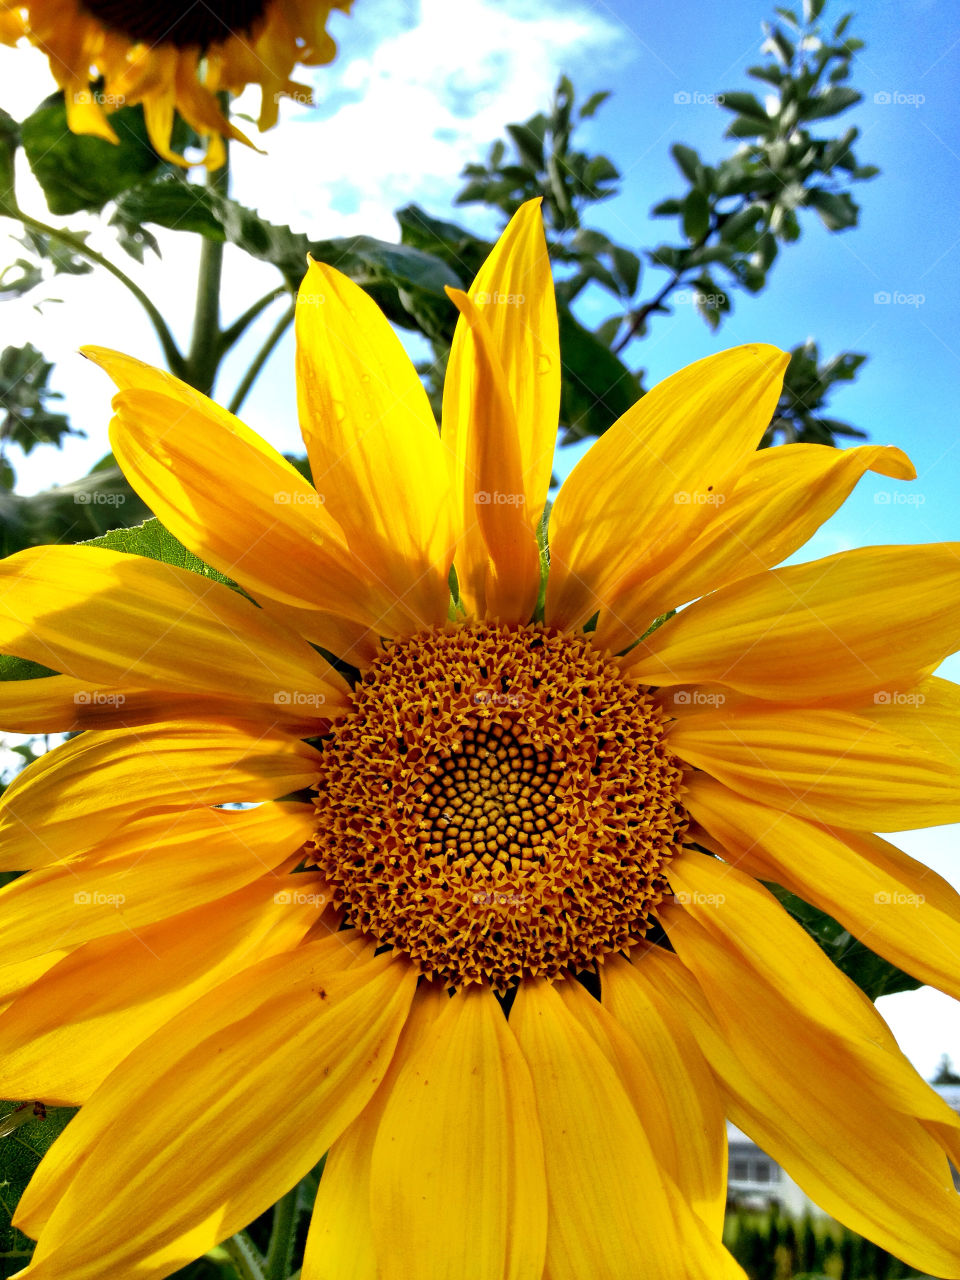 Sunflower blooming outdoors